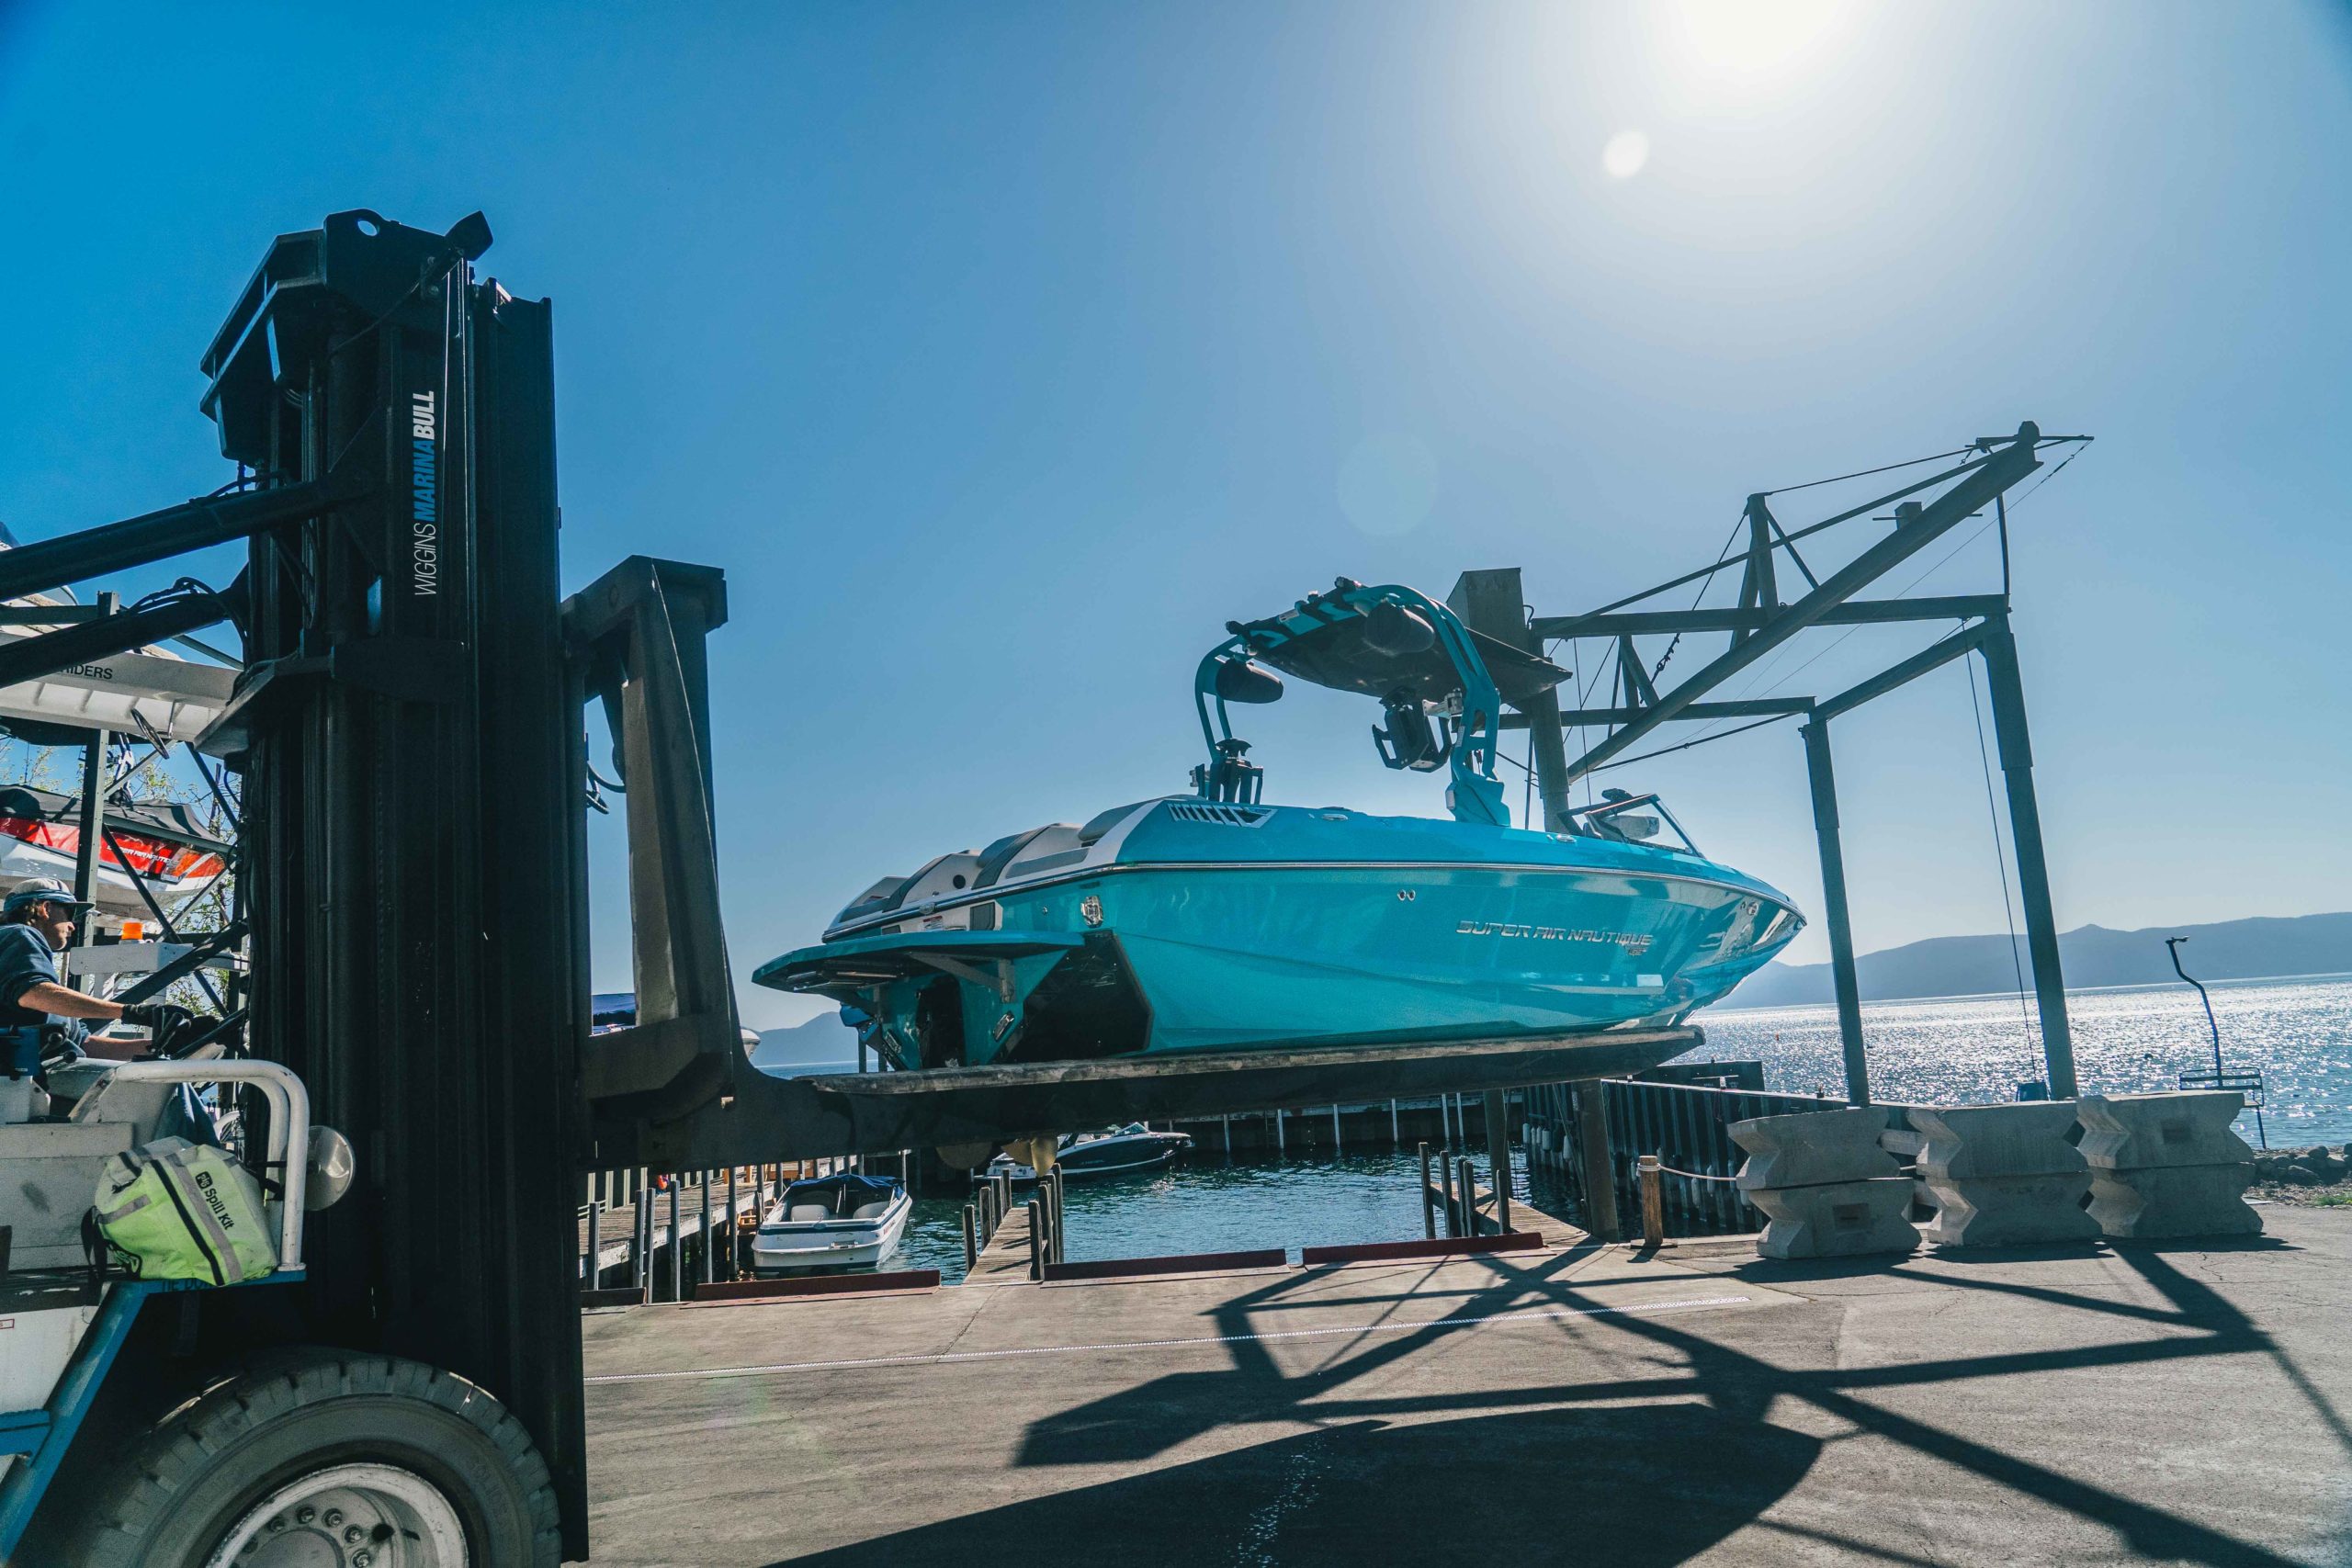 Super Air Nautique GS22E at Homewood High & Dry Marina Lake Tahoe powered by Ingenity Electric